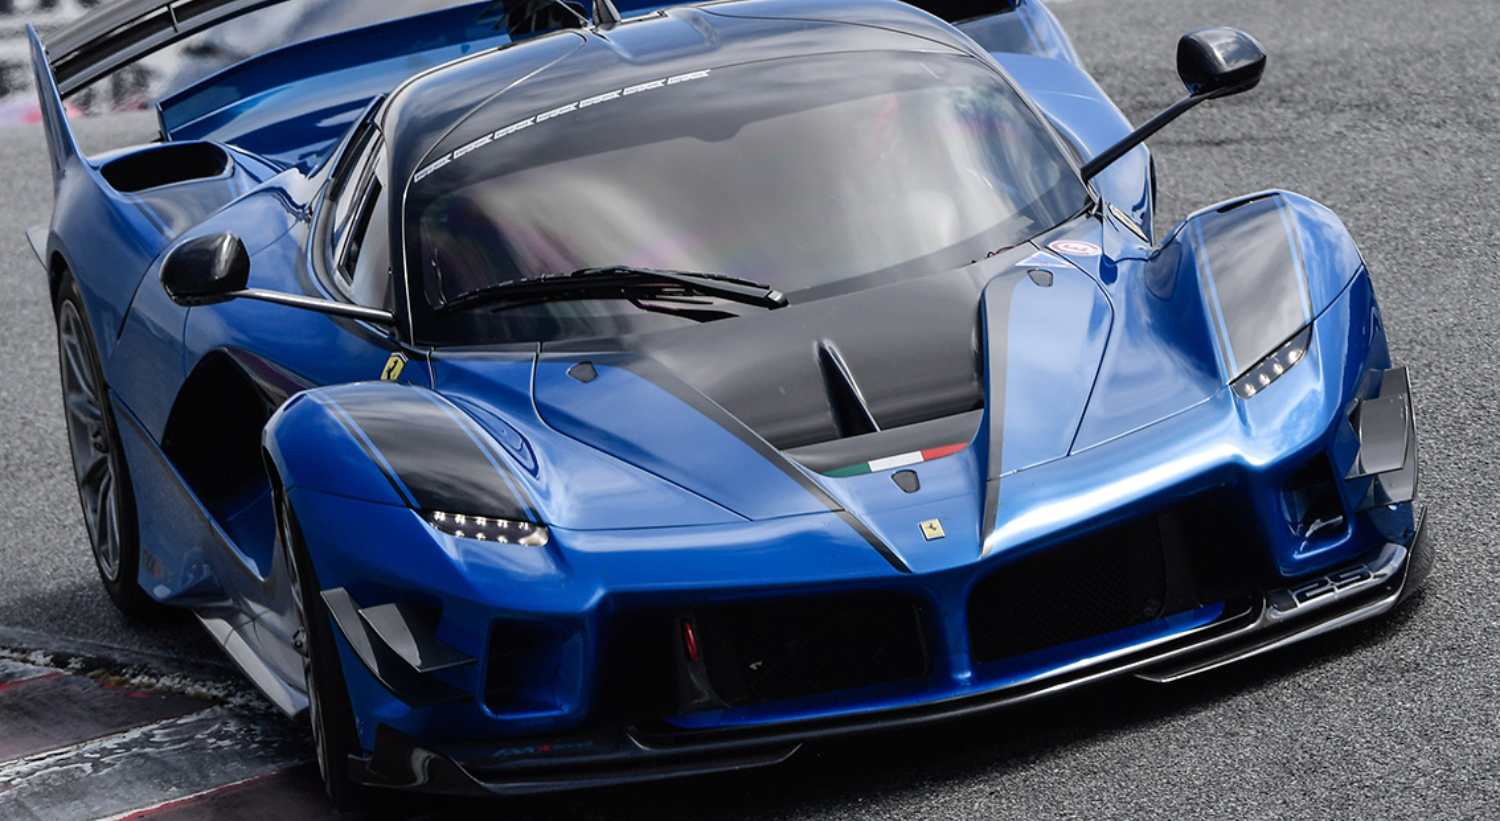 The Ferrari FXX K on the track, which won the case over Mansory